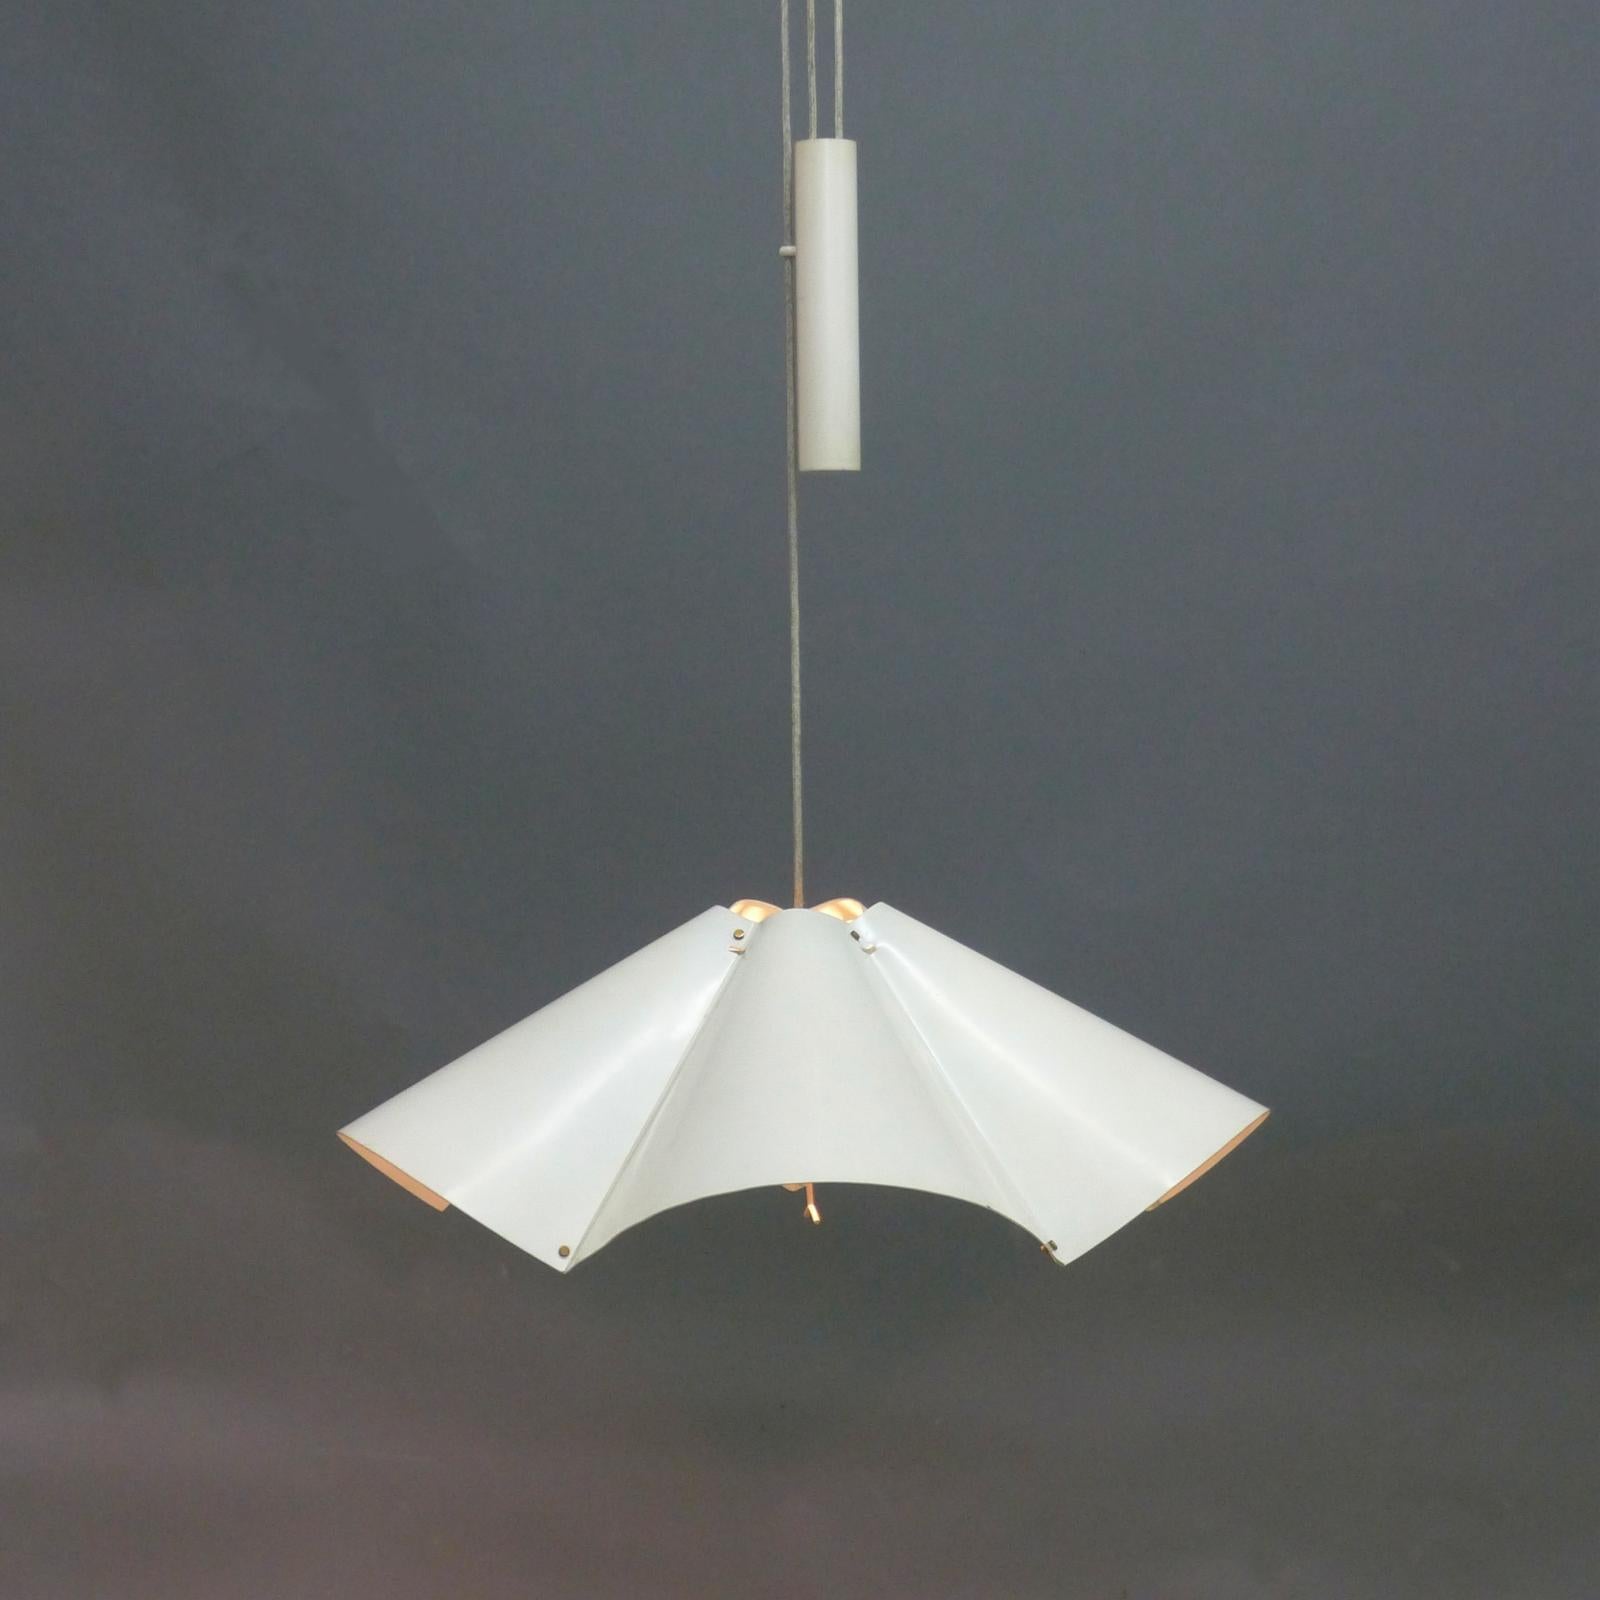 Gino Sarfatti for Arteluce, Rise and Fall Pendant Light, Model 2134, 1950s For Sale 11